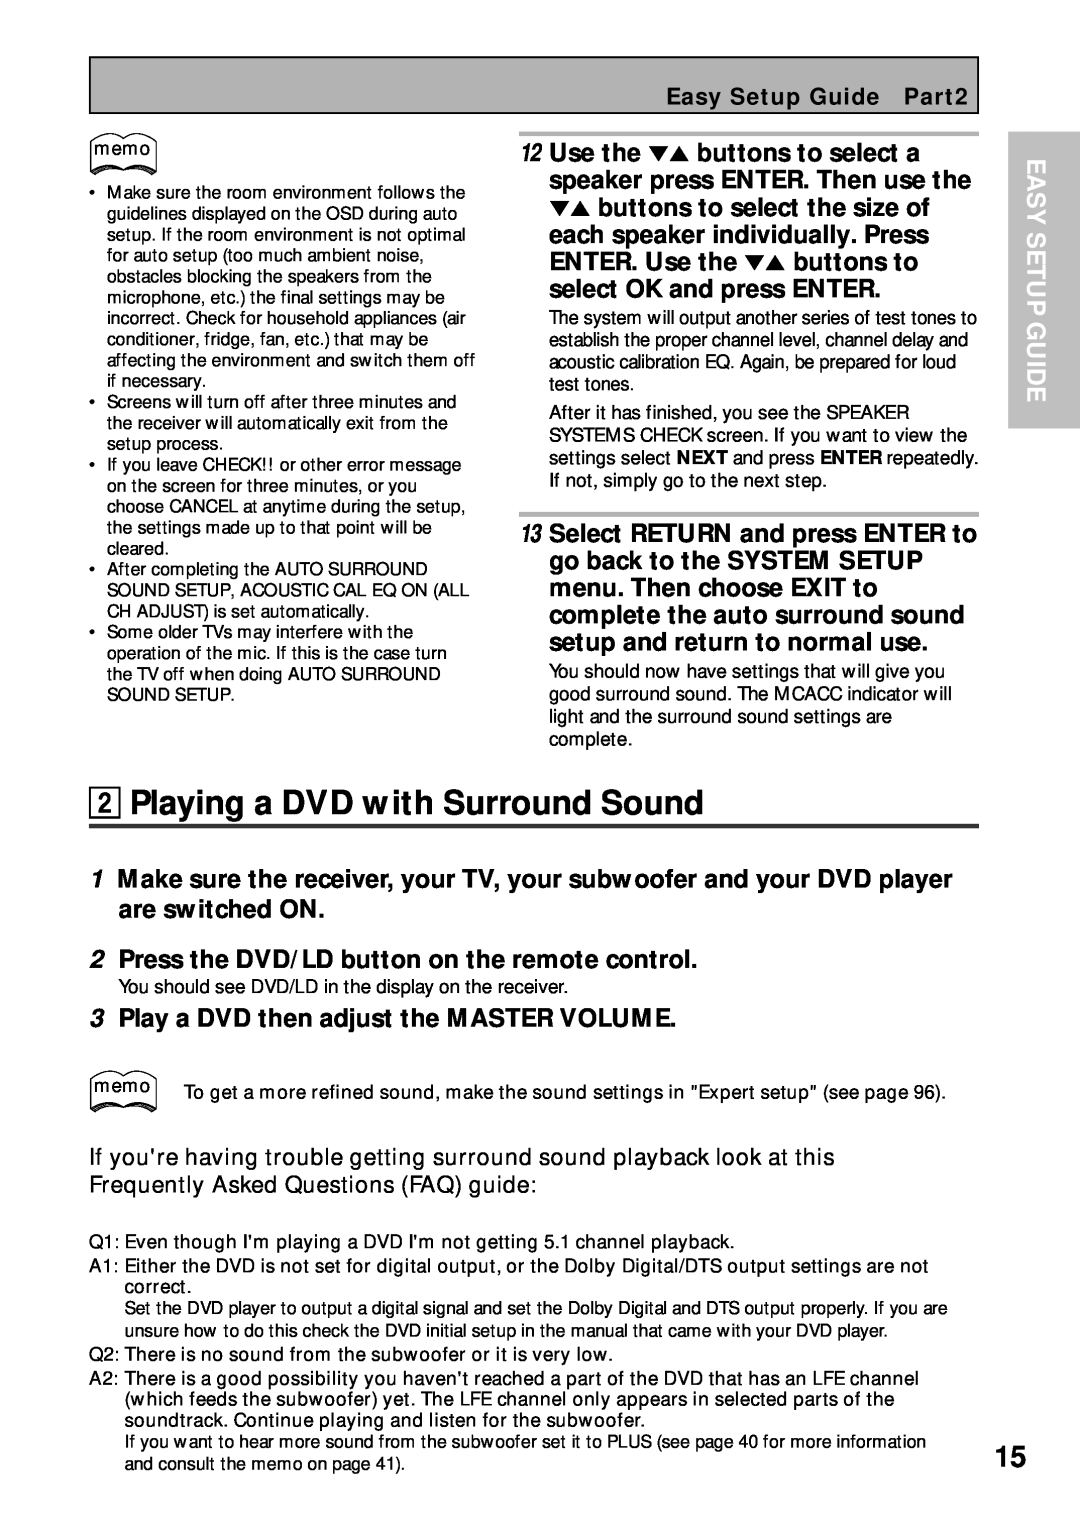 Pioneer VSX-45TX 2Playing a DVD with Surround Sound, 2Press the DVD/LD button on the remote control, Easy Setup Guide 